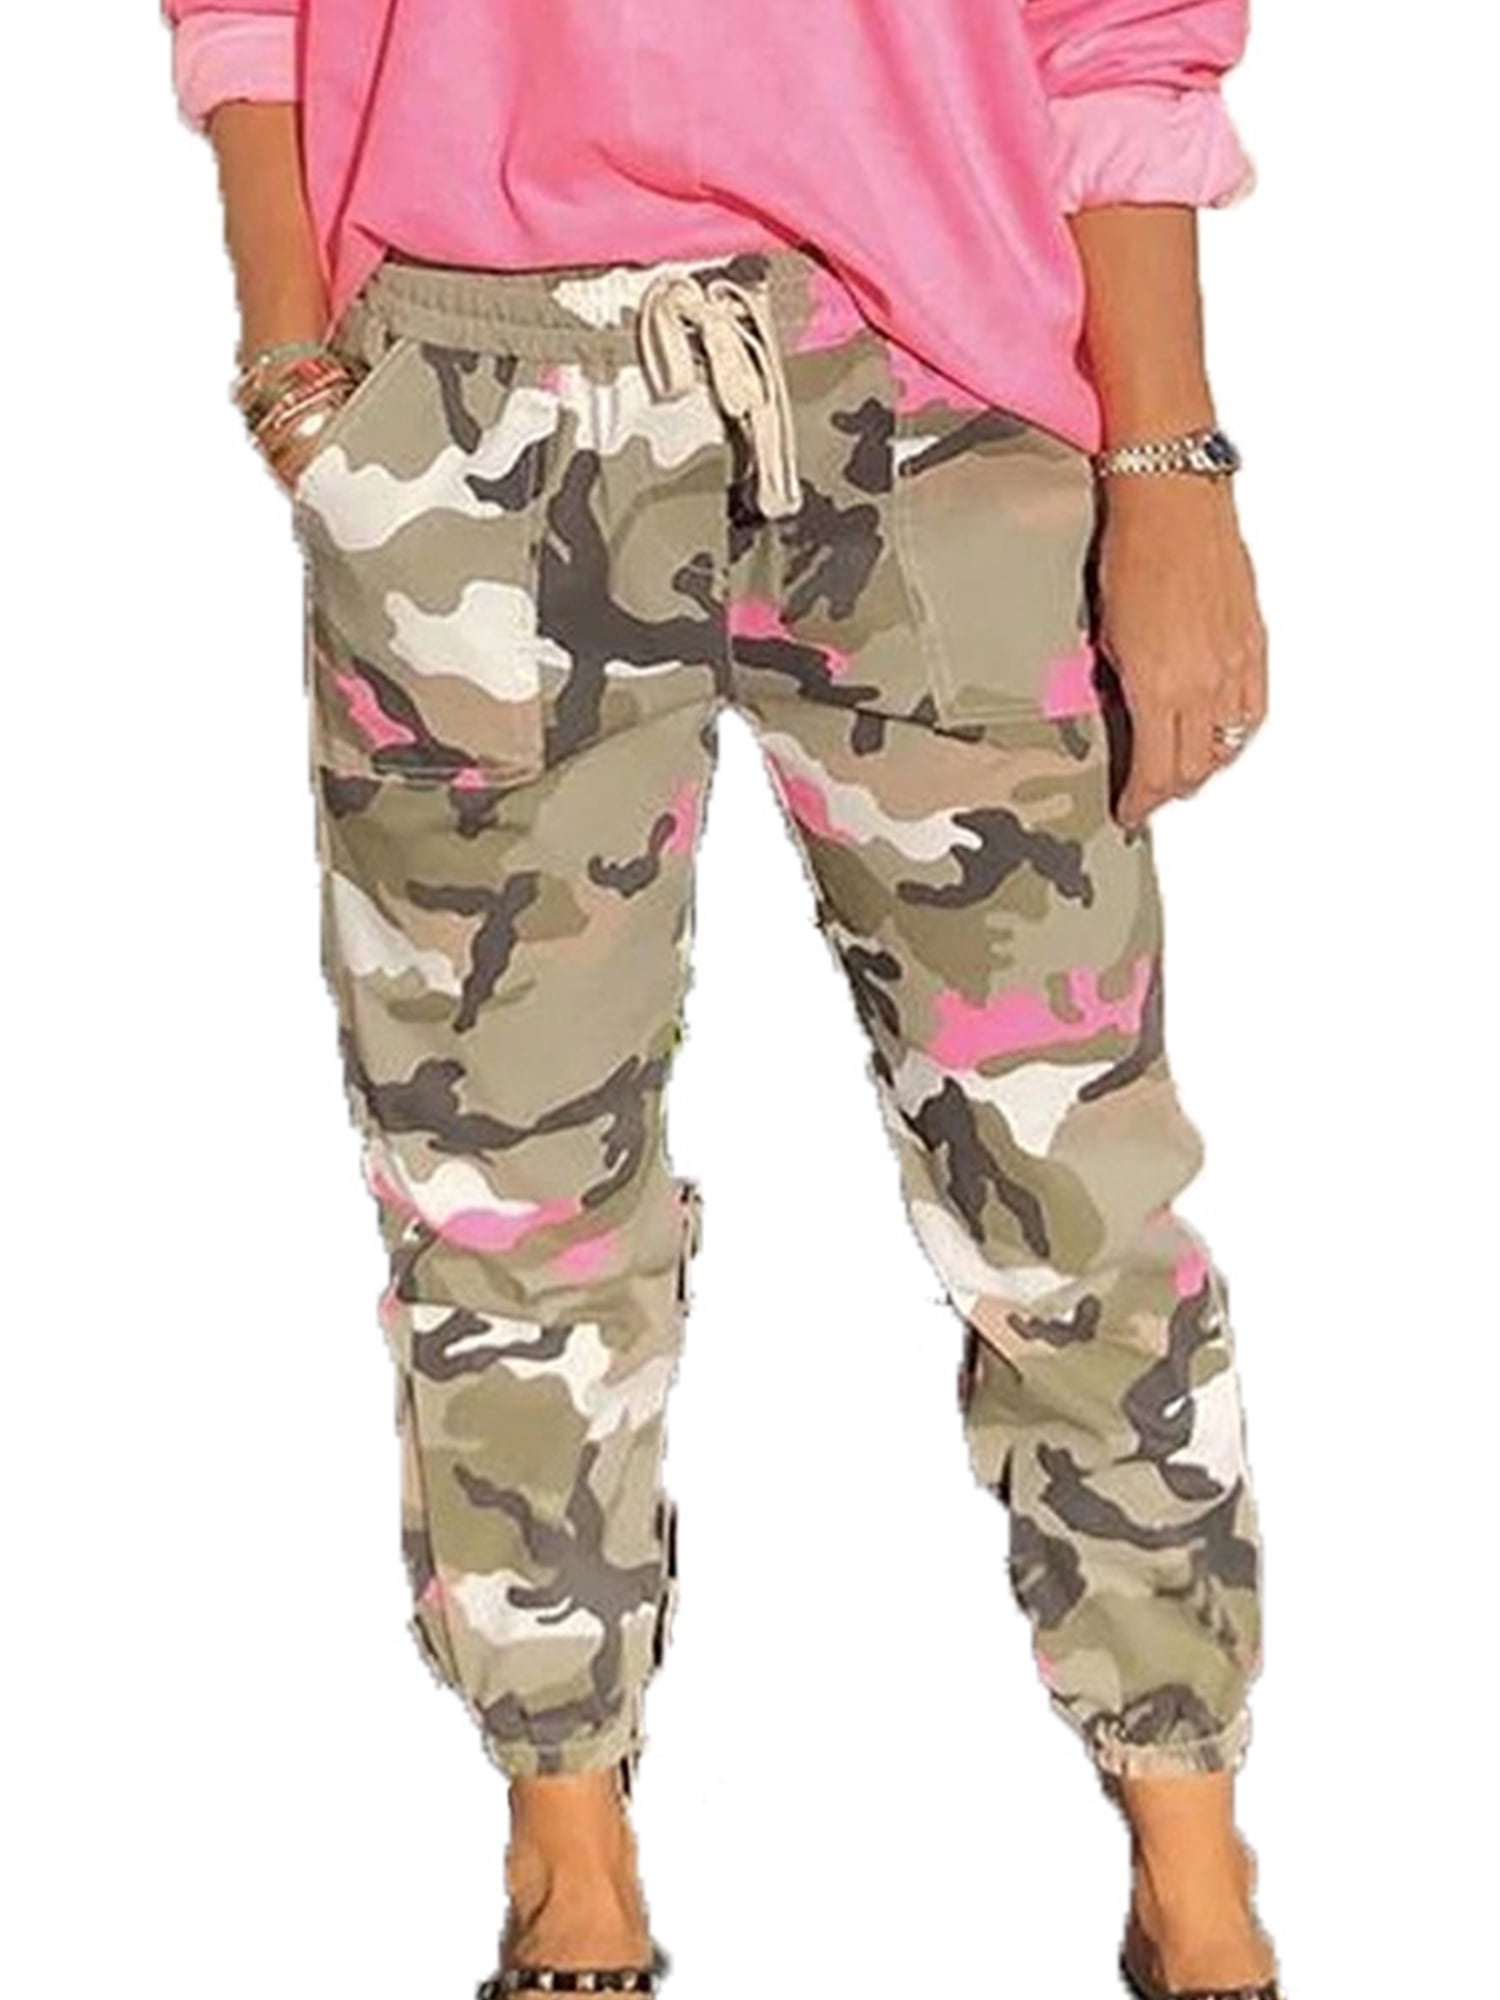 New Ladies Women Camouflage Army Zip Stretchy Pull On Jeggings Legging Size 8-20 